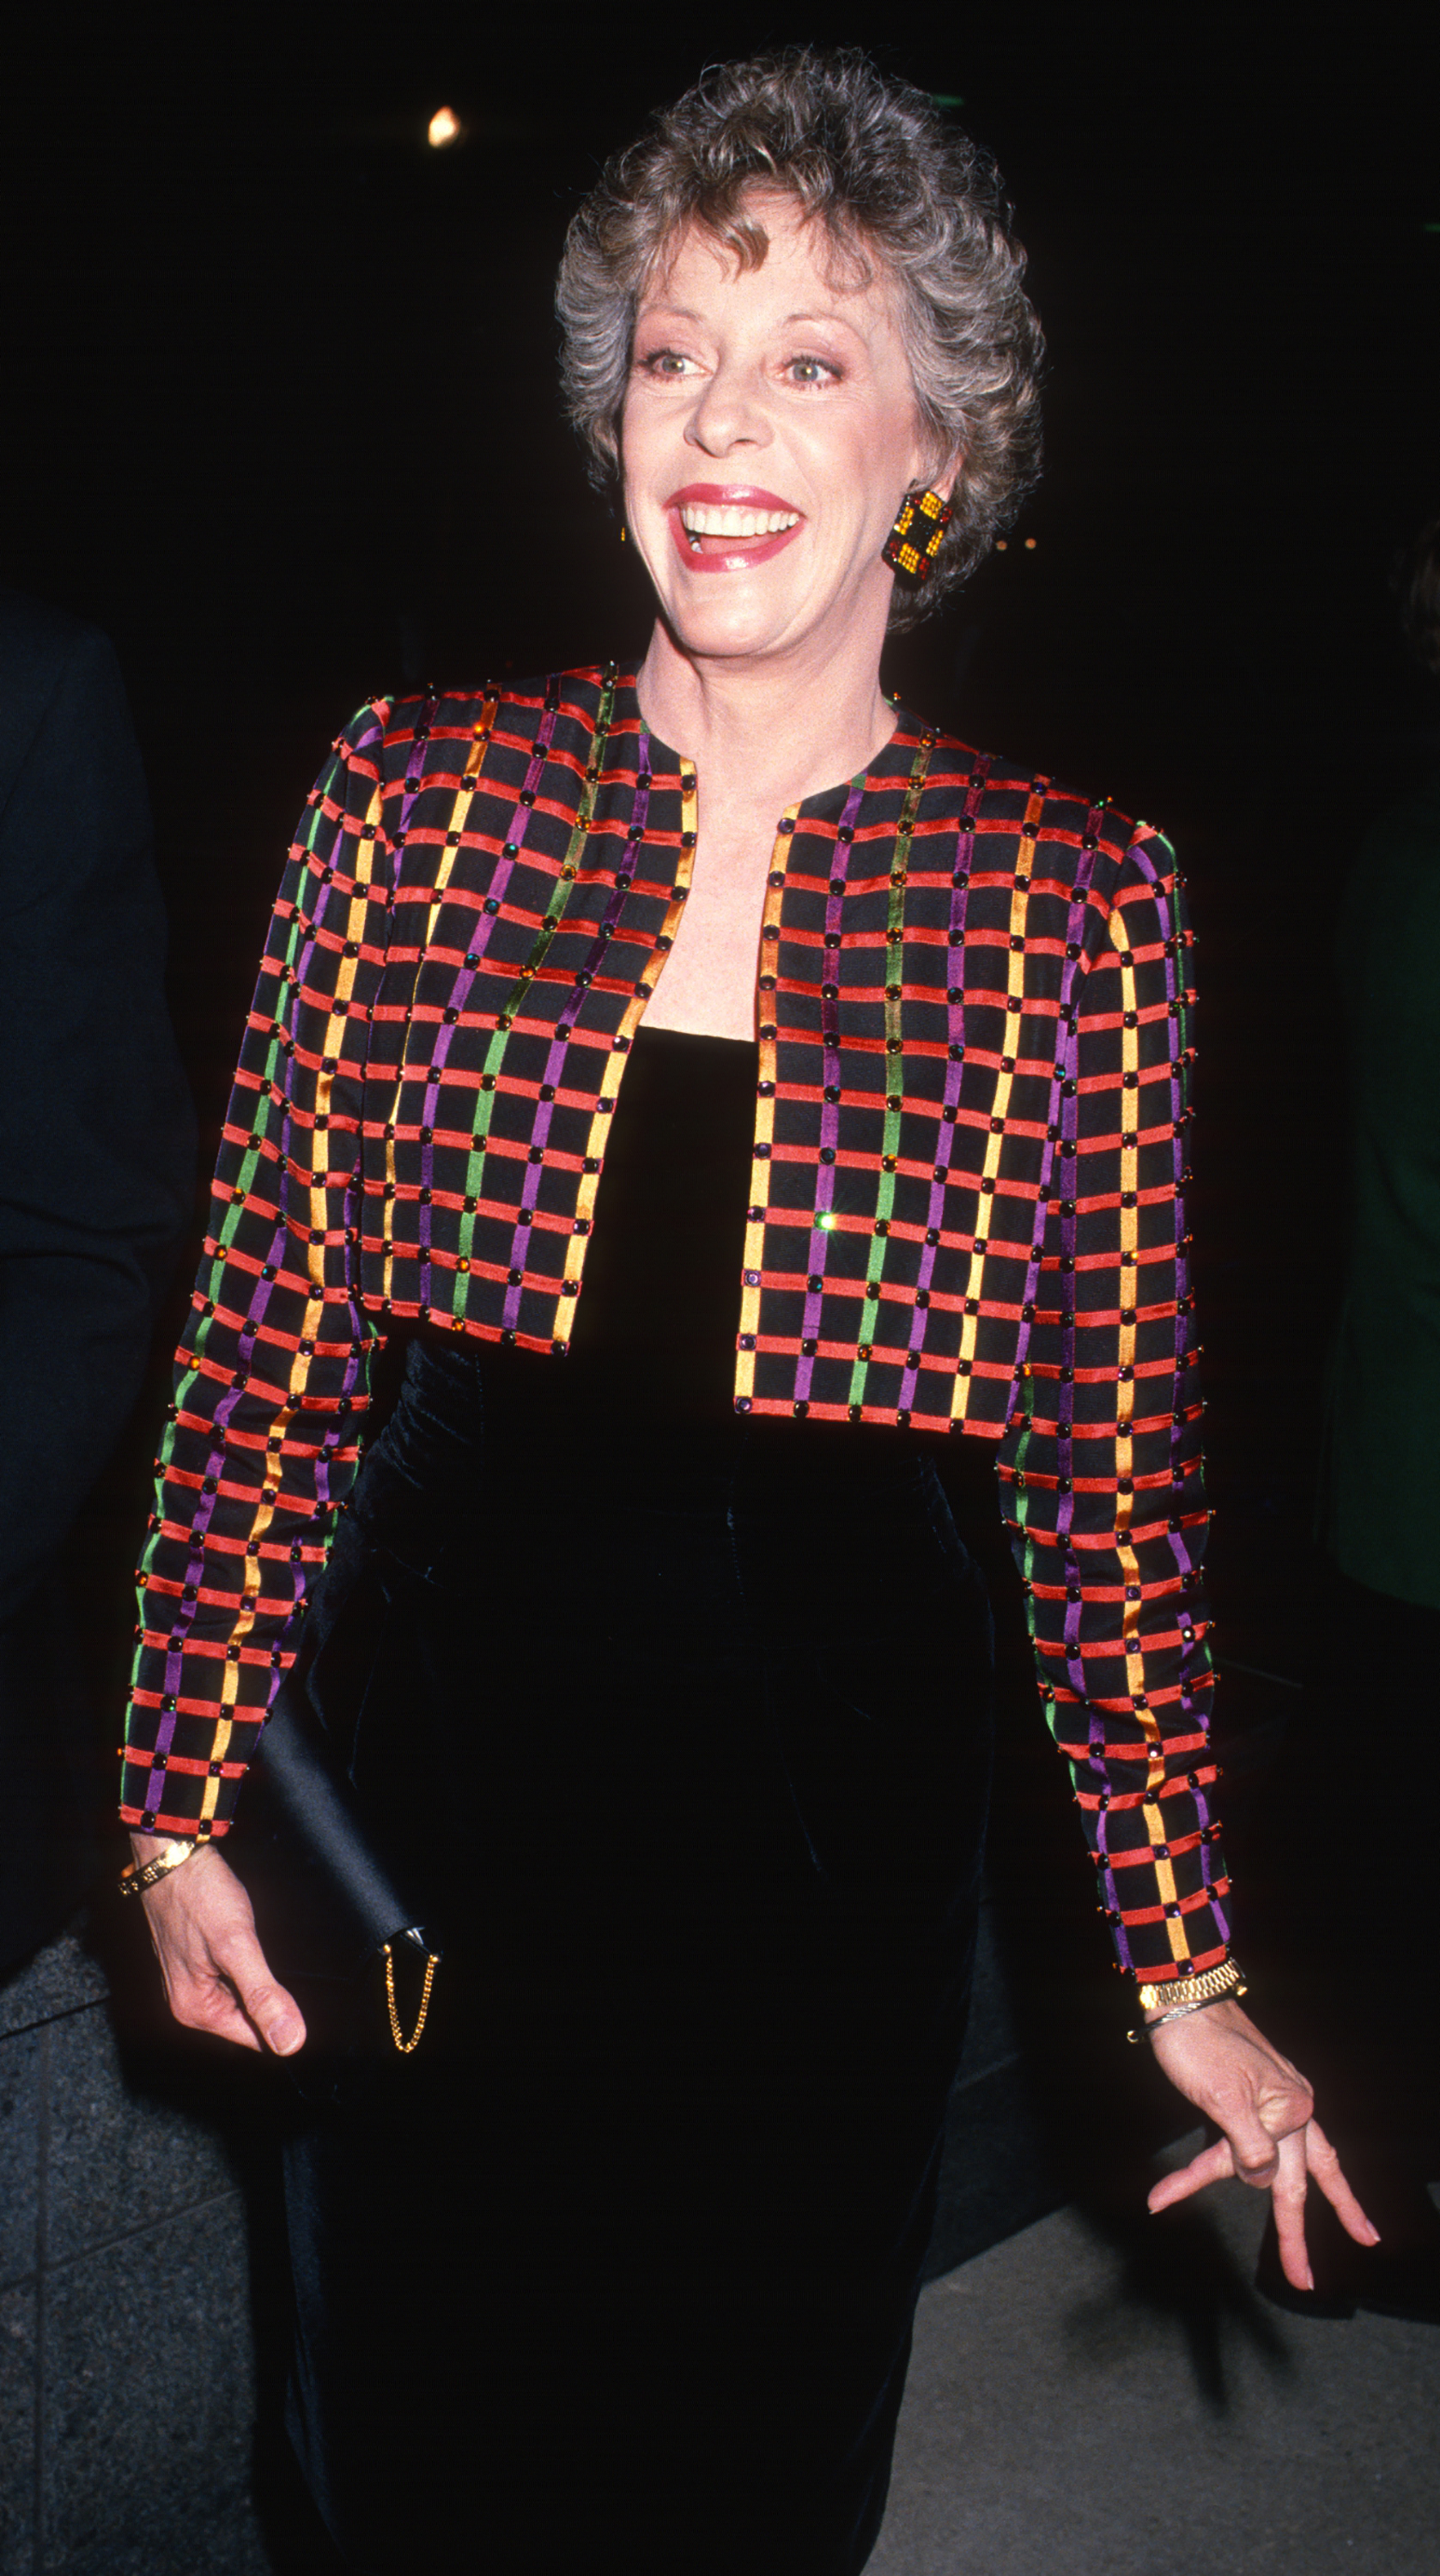 Carol Burnett attends 'A Tribute to Elizabeth Taylor at the Bob Hope Cultural Center, Palm Springs, California, on February 23, 1989. | Source: Getty Images